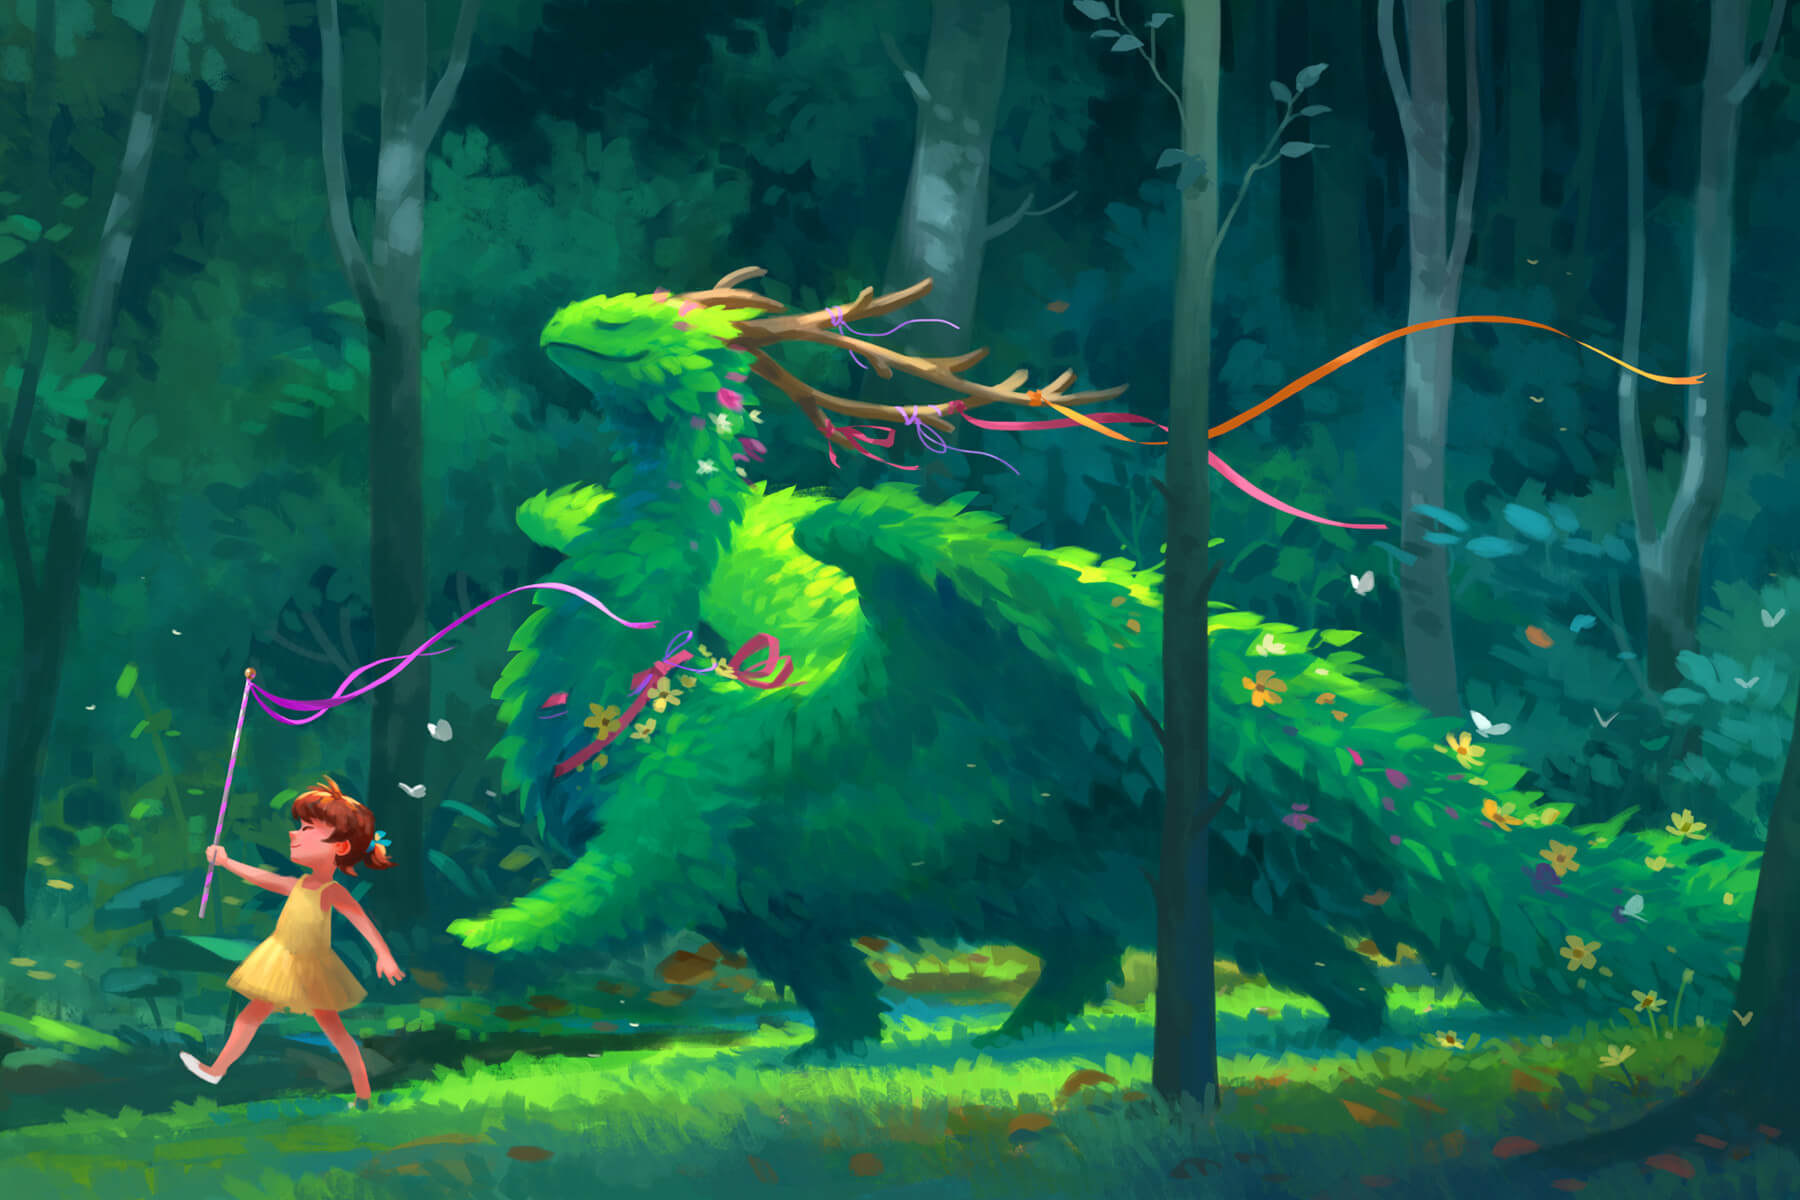 A girl marches through a forest with a mythological beast made of leaves, by Sandara Tang.